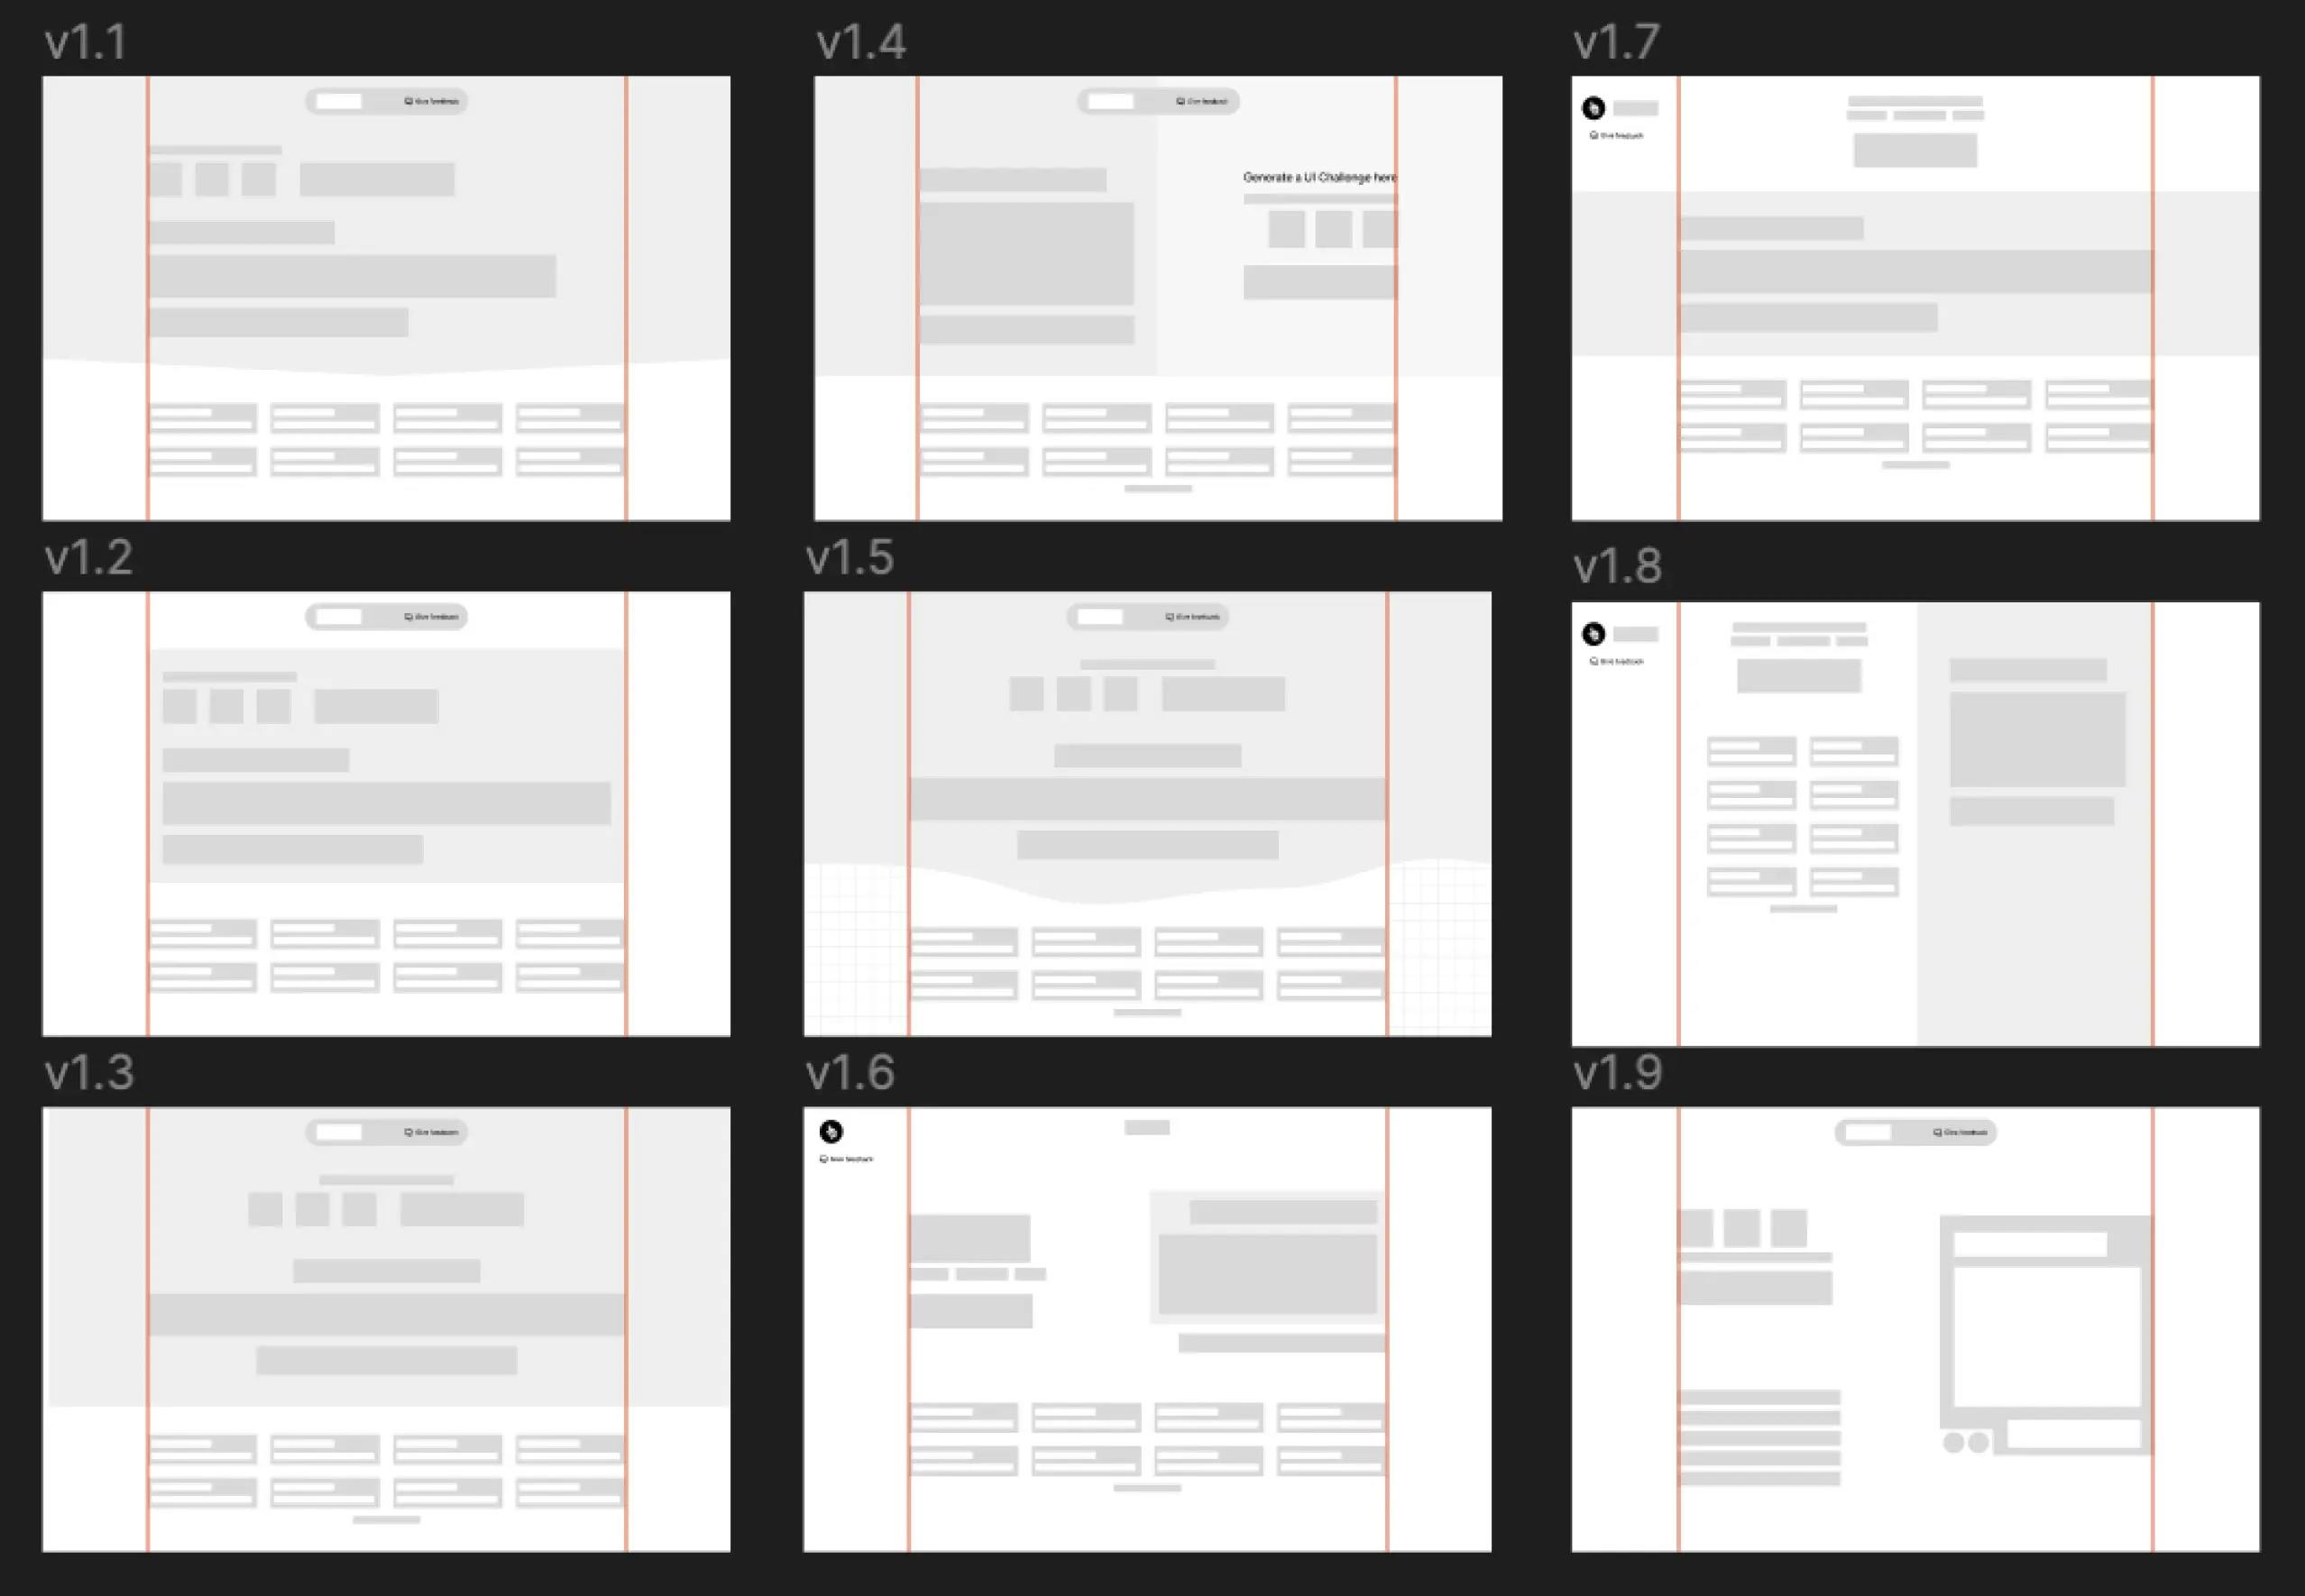 Gray and white low fidelity wireframes